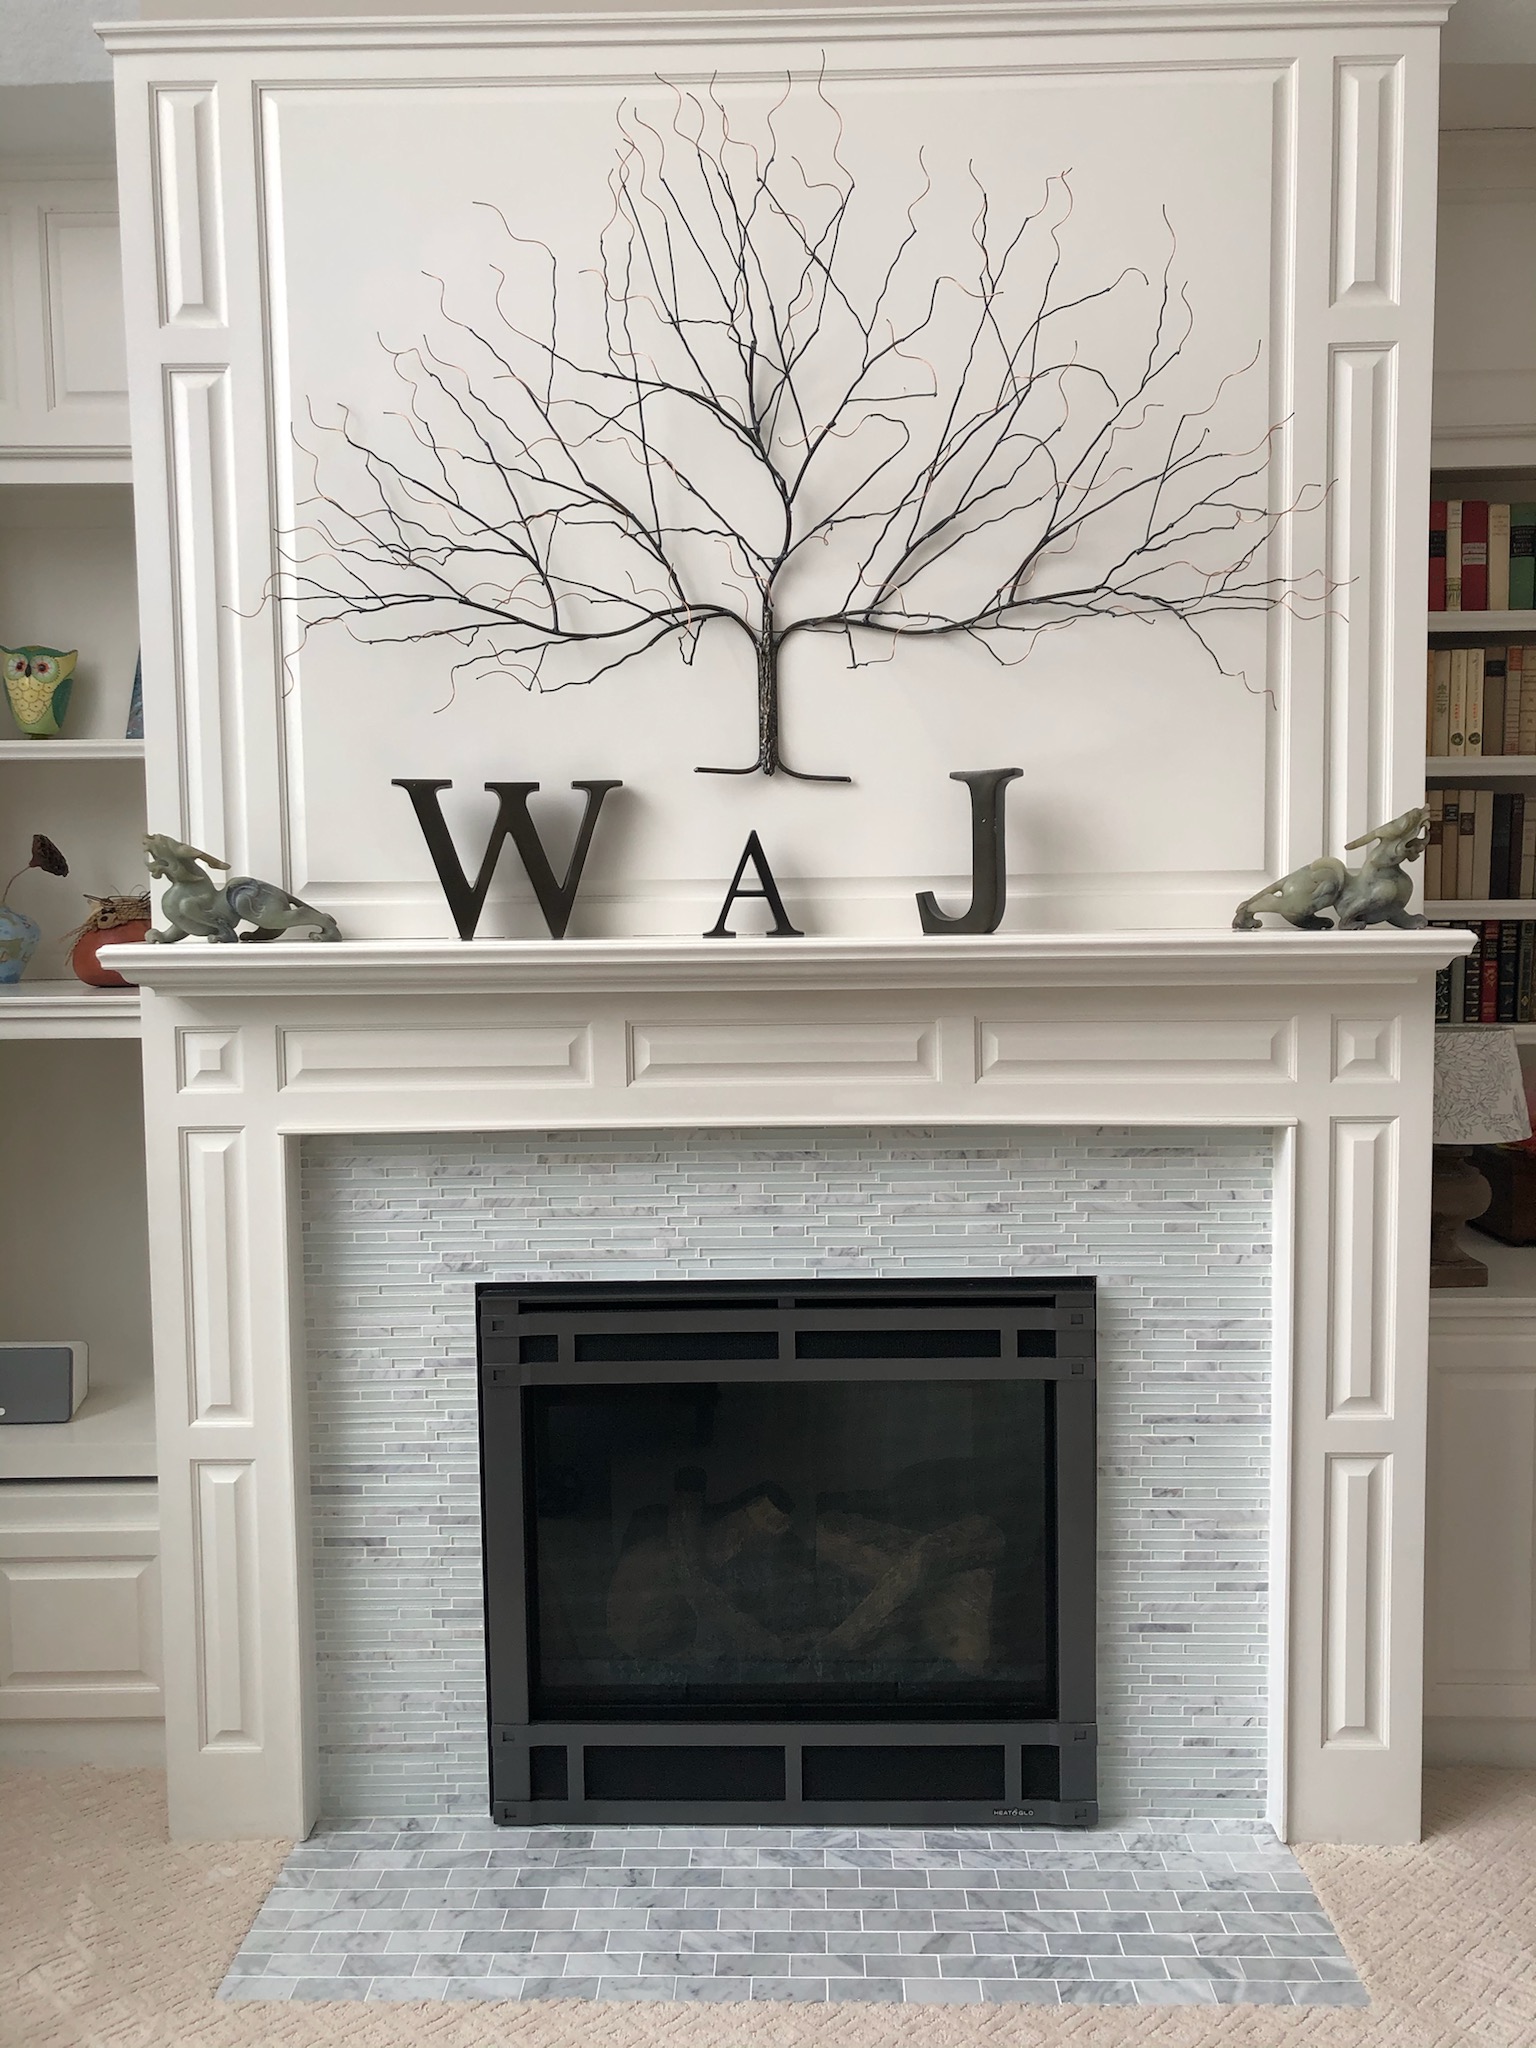 Fireplace with tile and wood surround